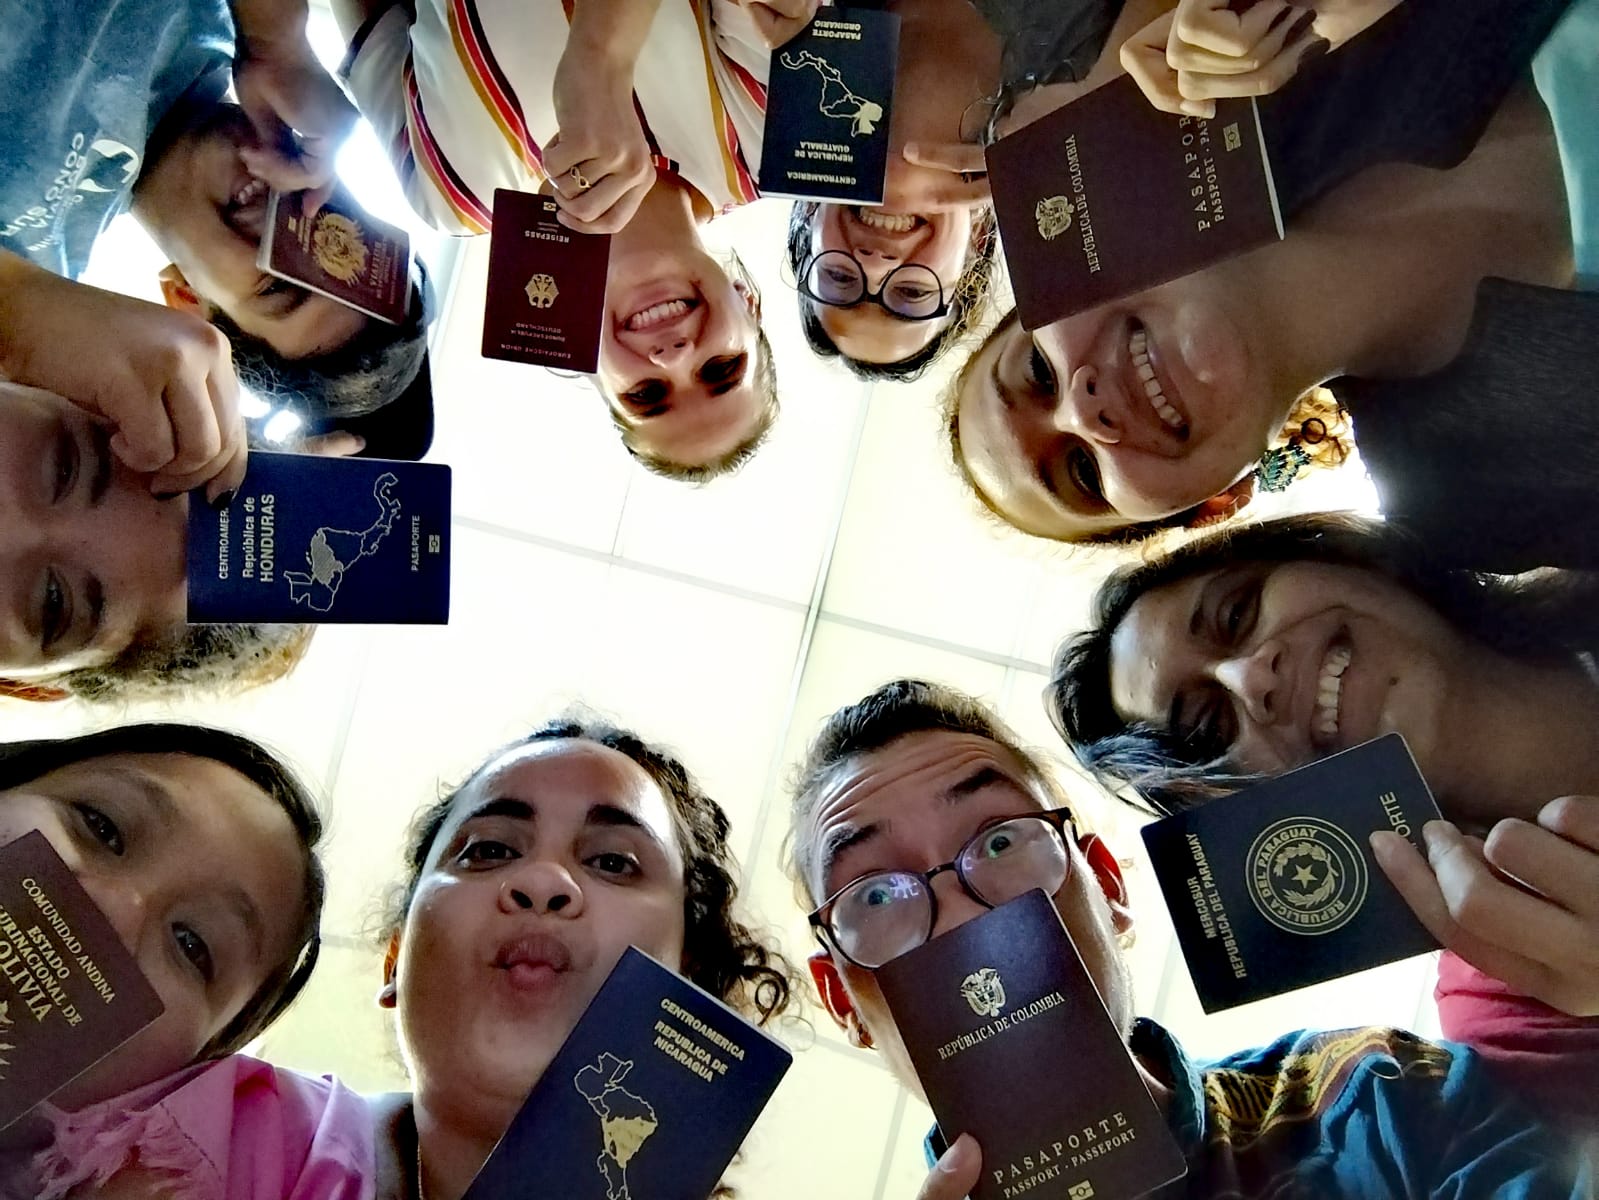 A group of students stand in a circle showing their passports, which are issued from different nations.